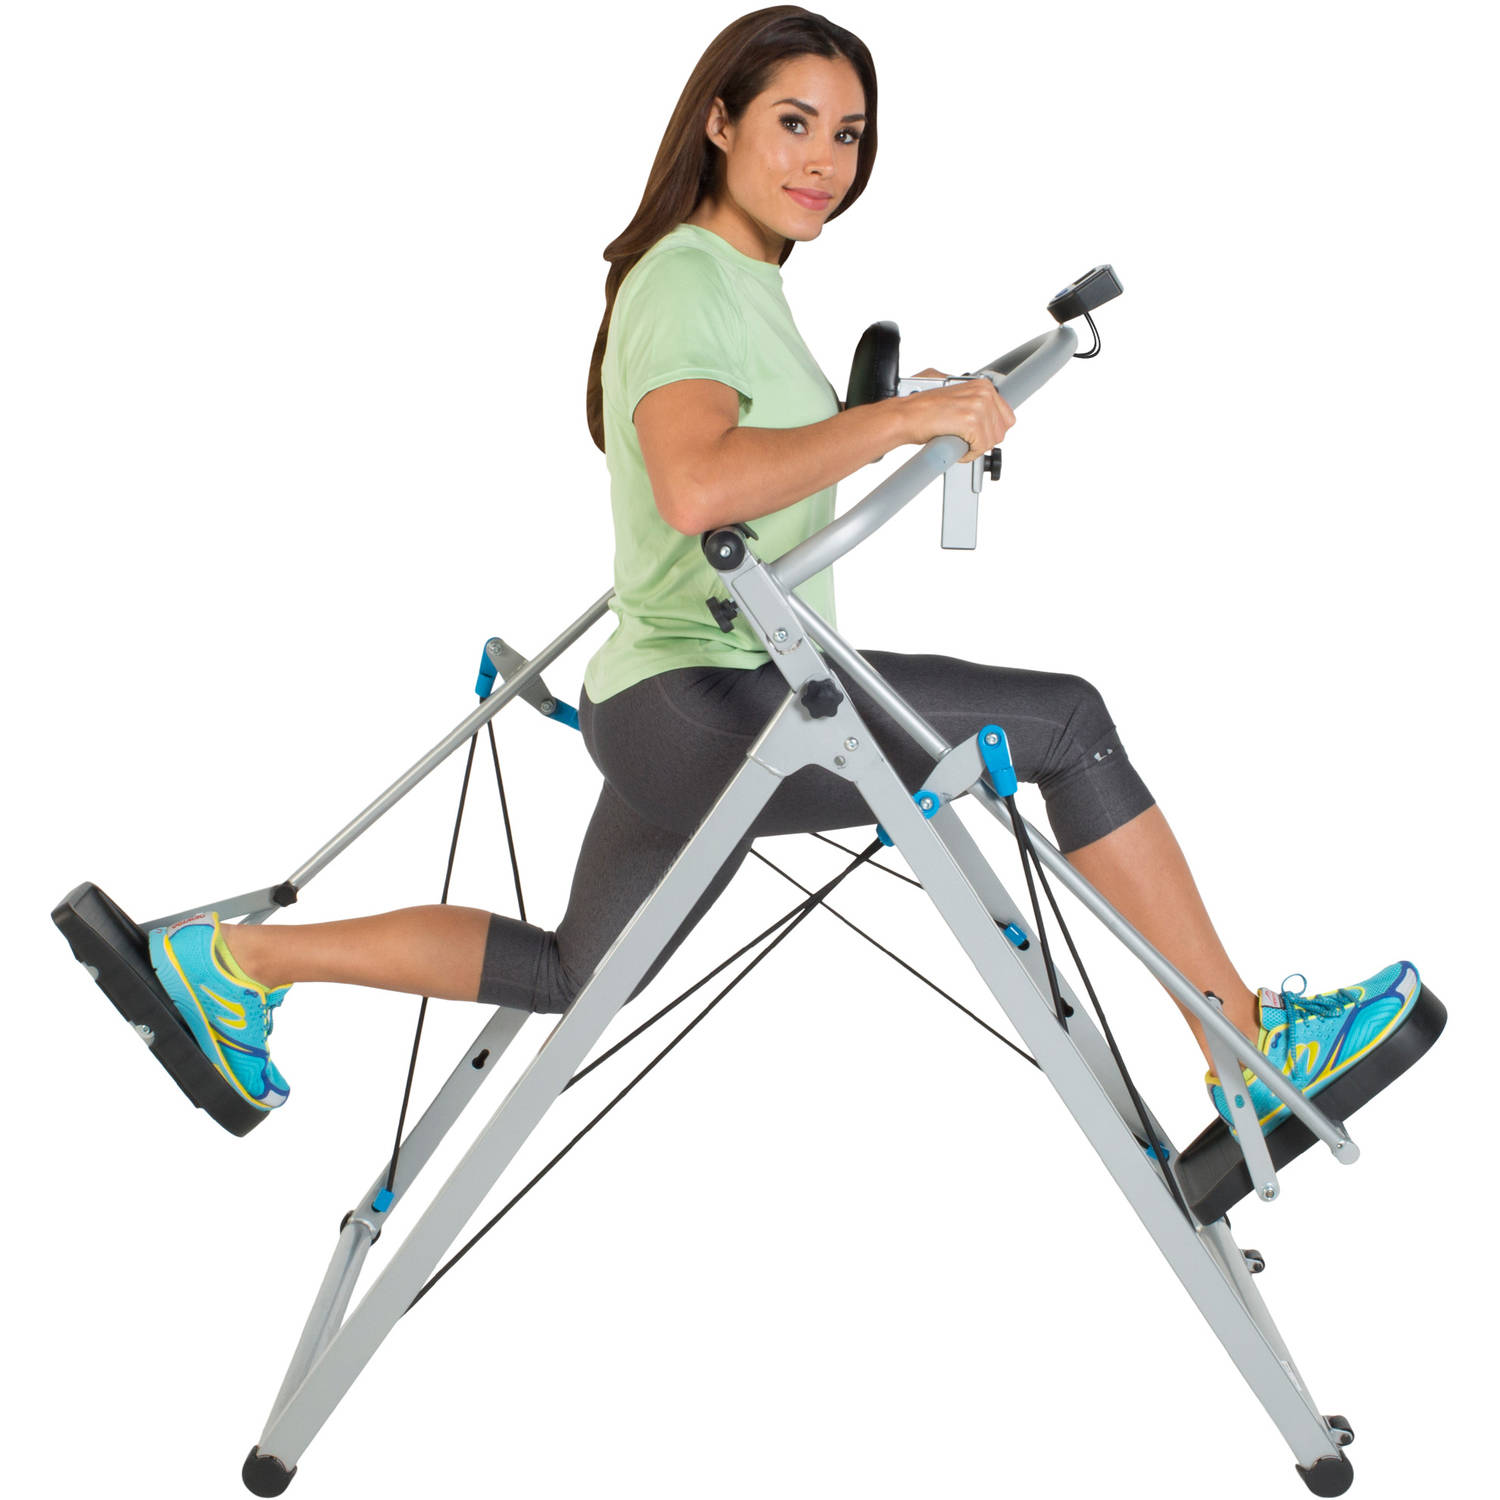 PROGEAR Freedom 48" Stride Air Walker Elliptical LS1 with Heart Pulse Monitor - image 3 of 25